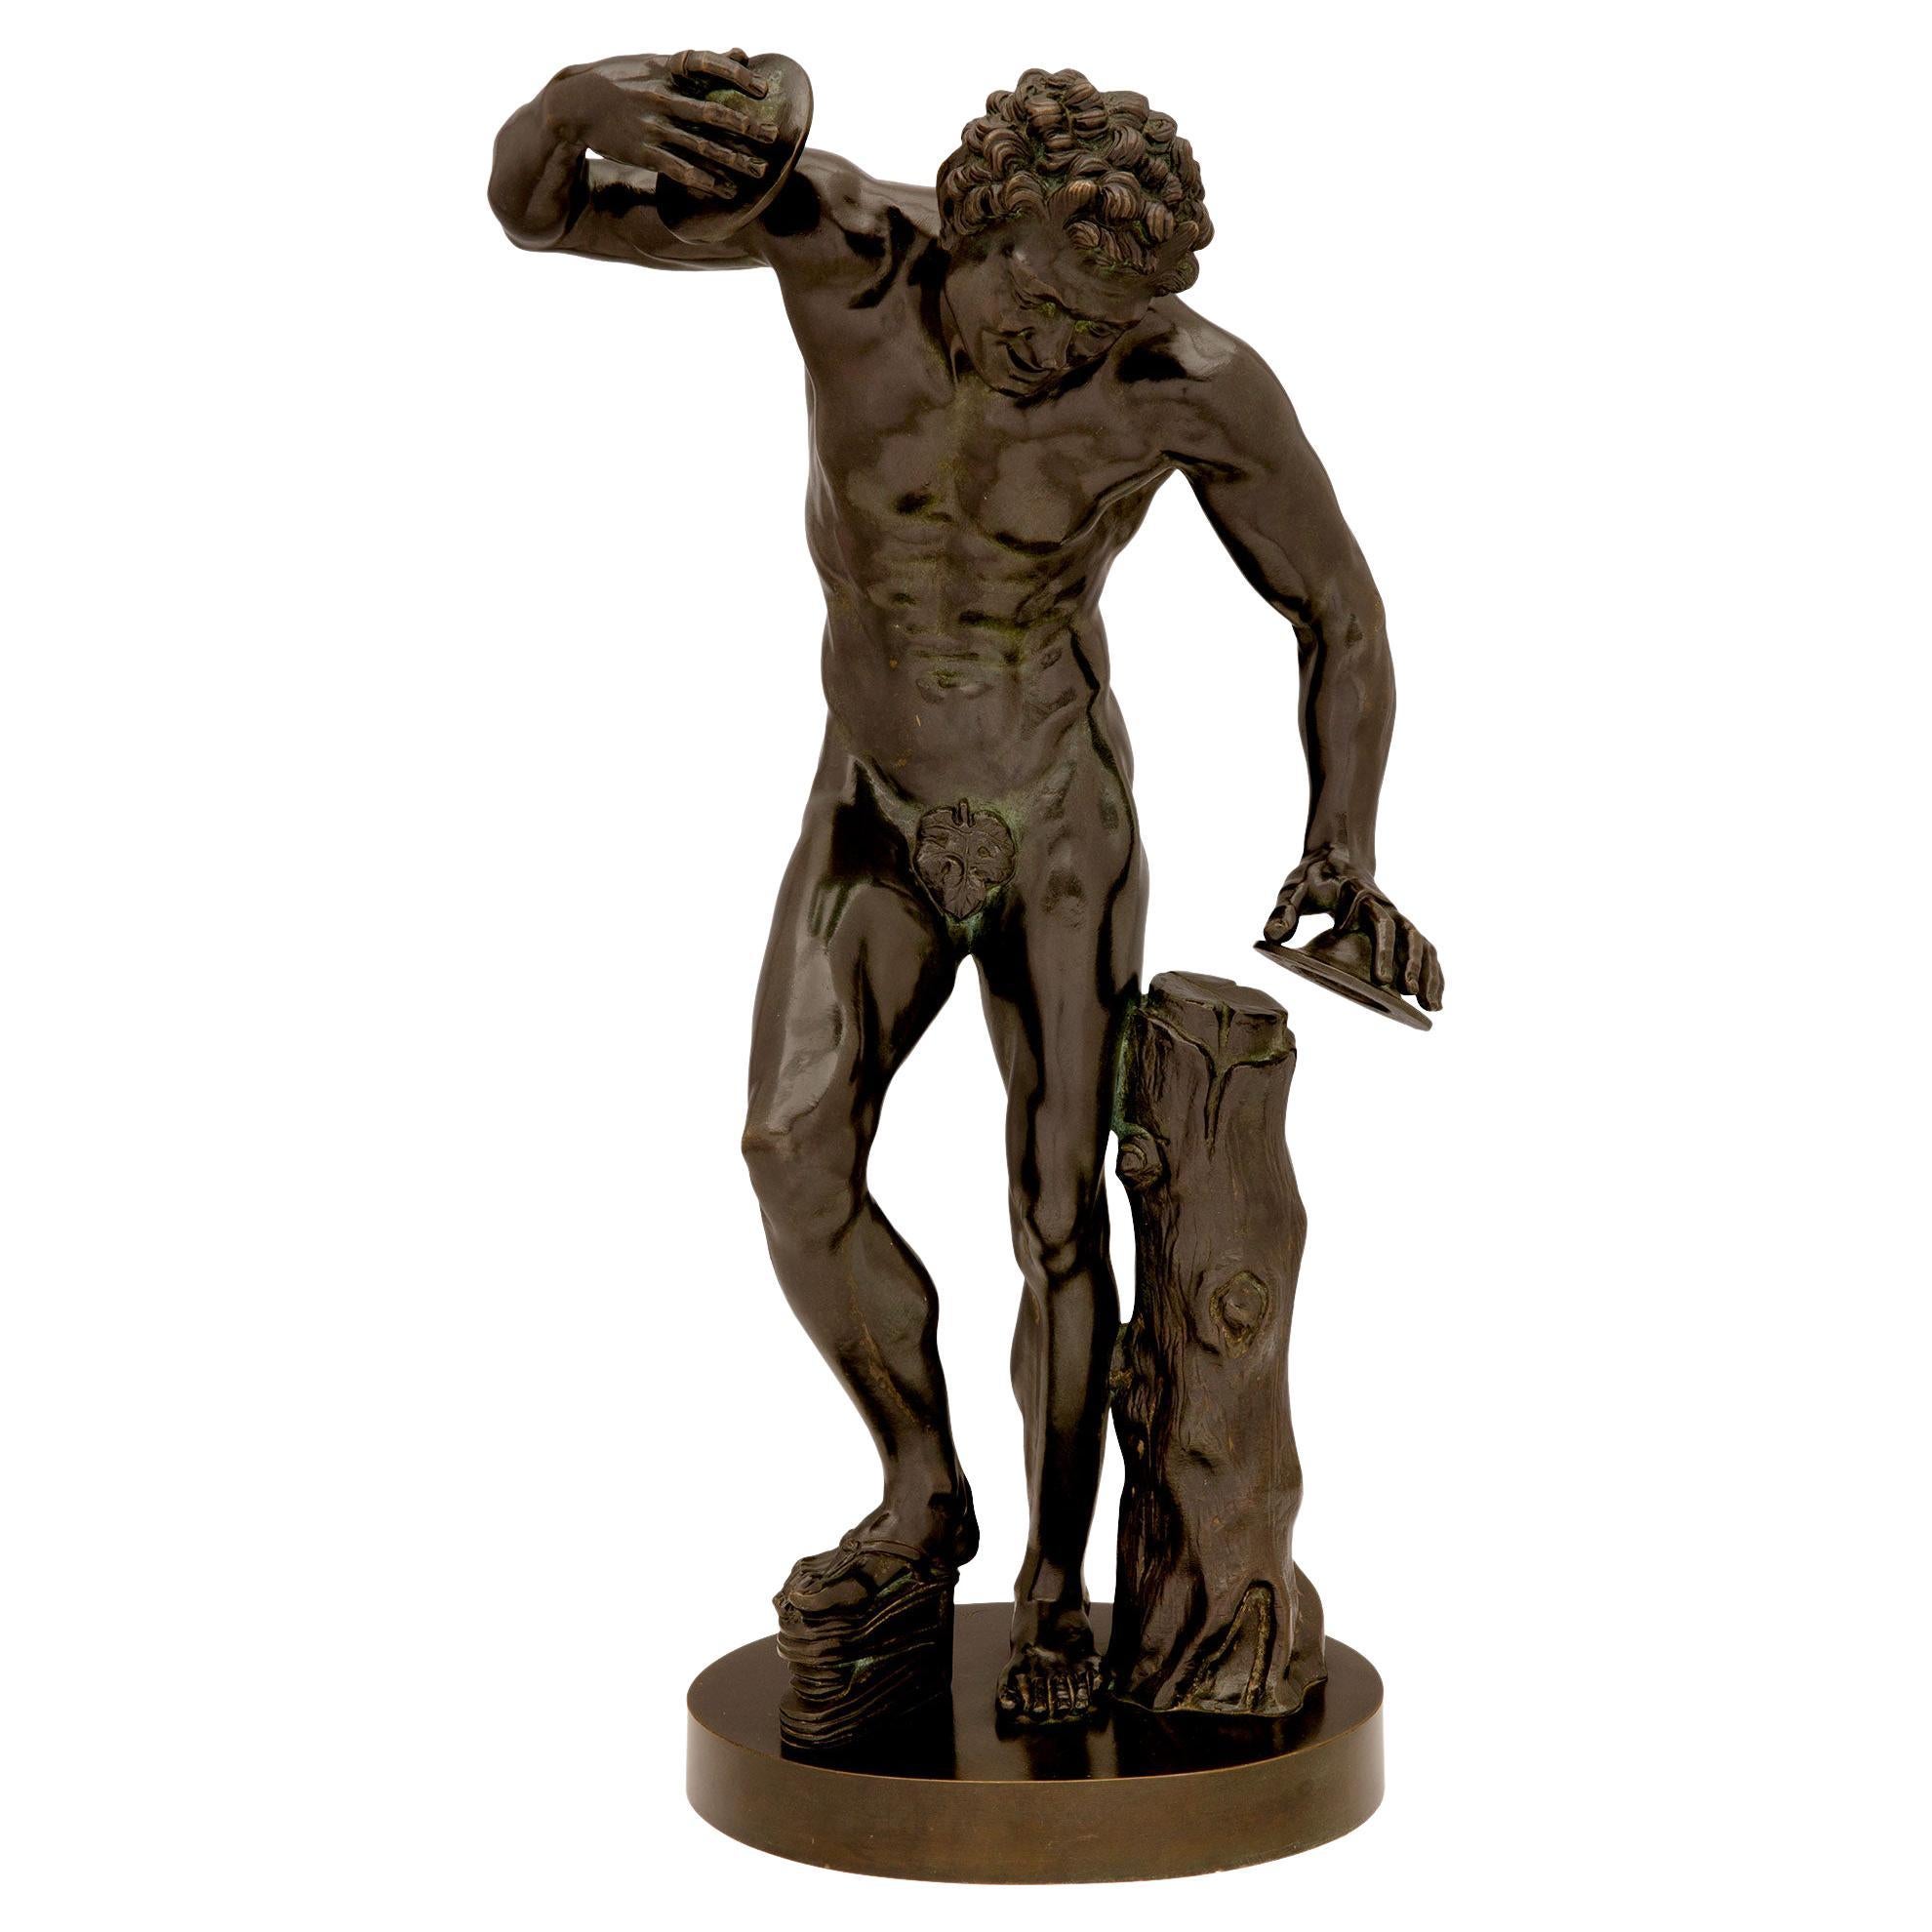 Continental 19th Century Patinated Bronze Statue of a Dancing Faun with Cymbals